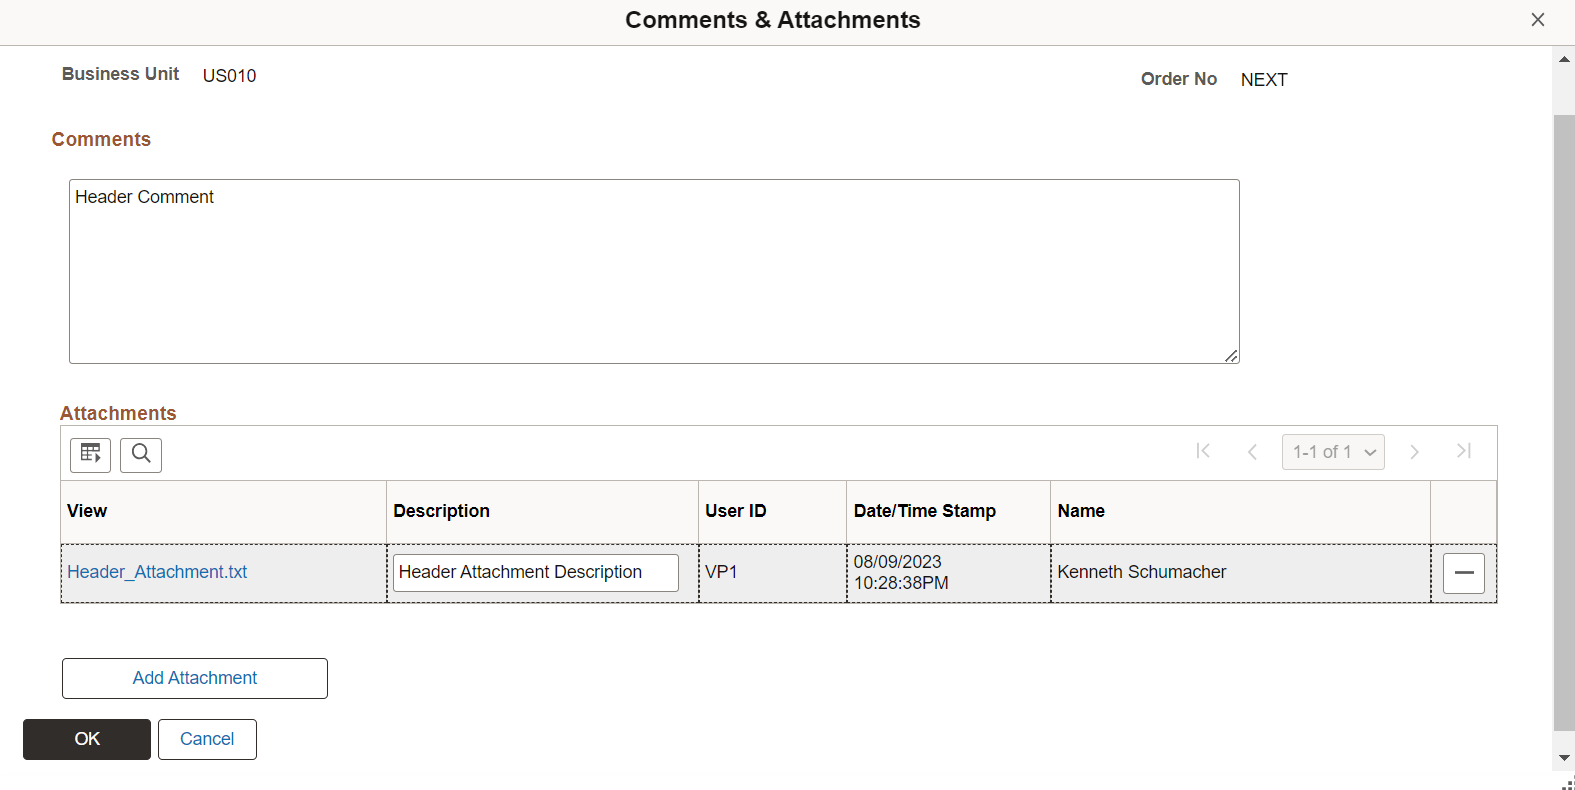 &Express Issue - Header Comments & Attachments Page